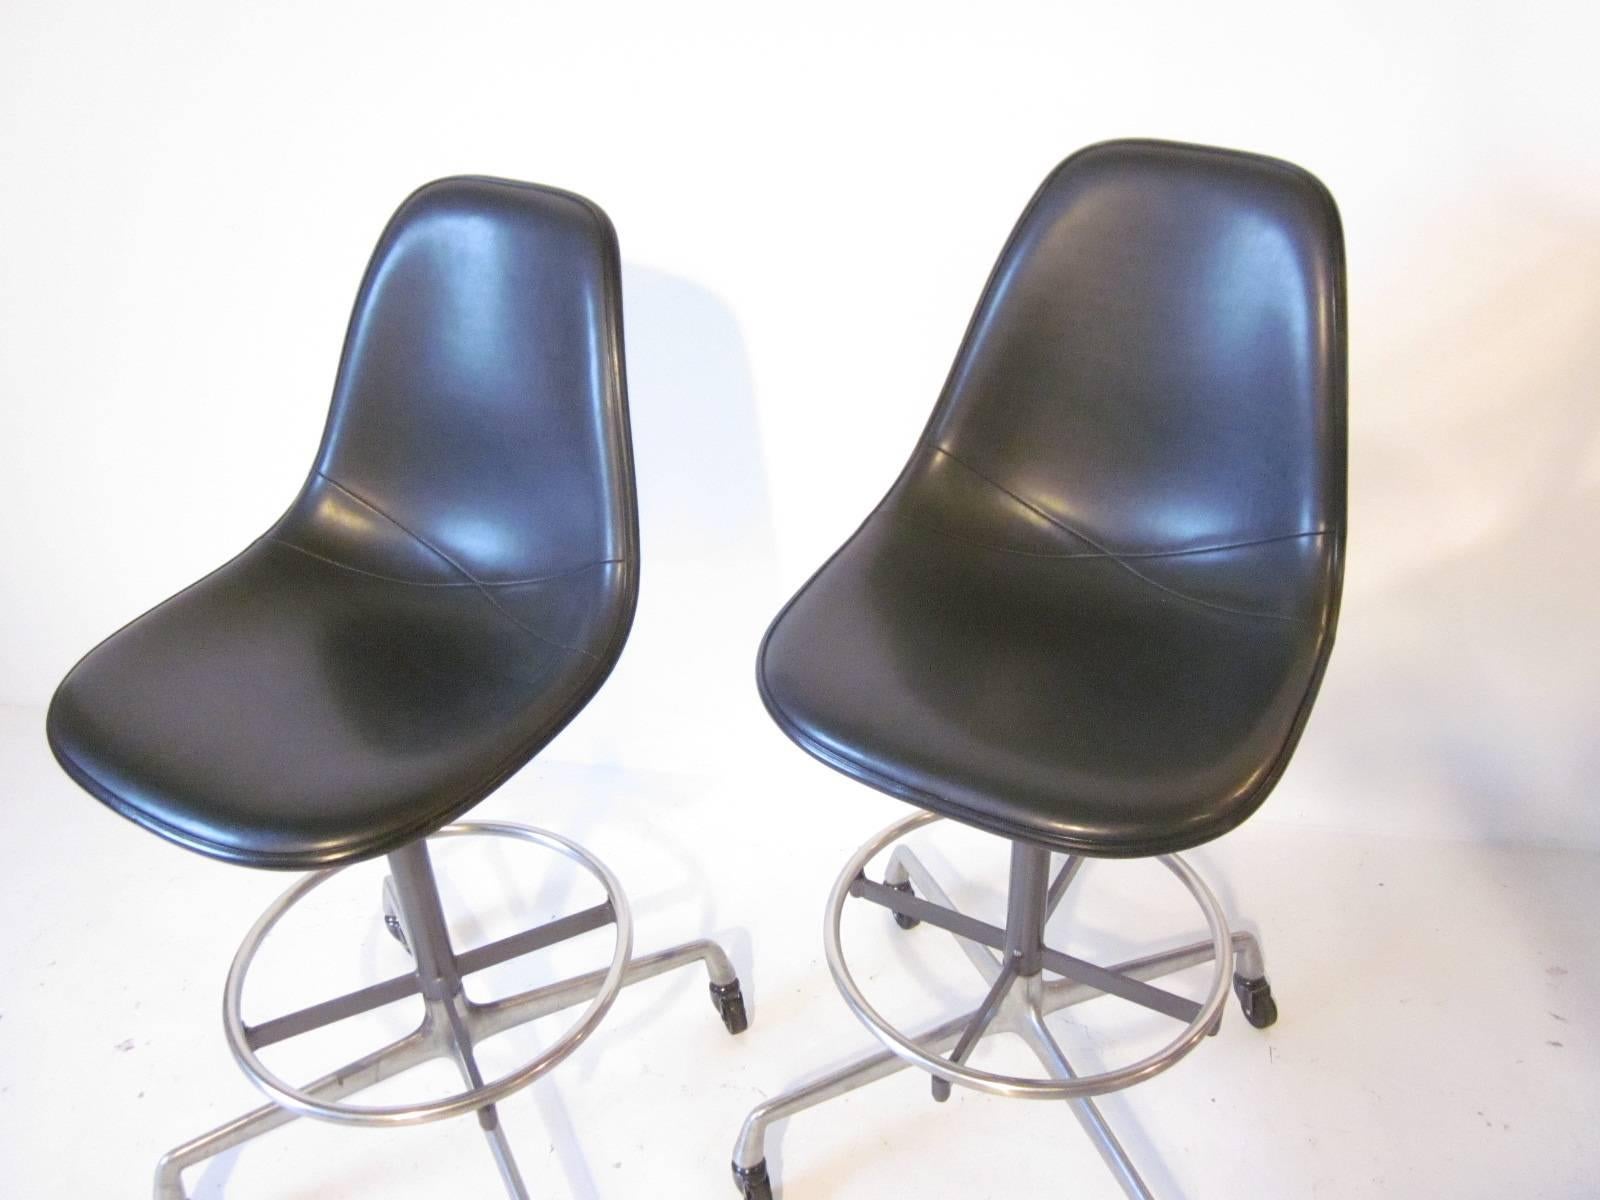 Upholstered Eames architectural rolling stools with adjustable seat height and chrome foot rest. Manufactured by the Herman Miller Furniture Company, seat height is 27